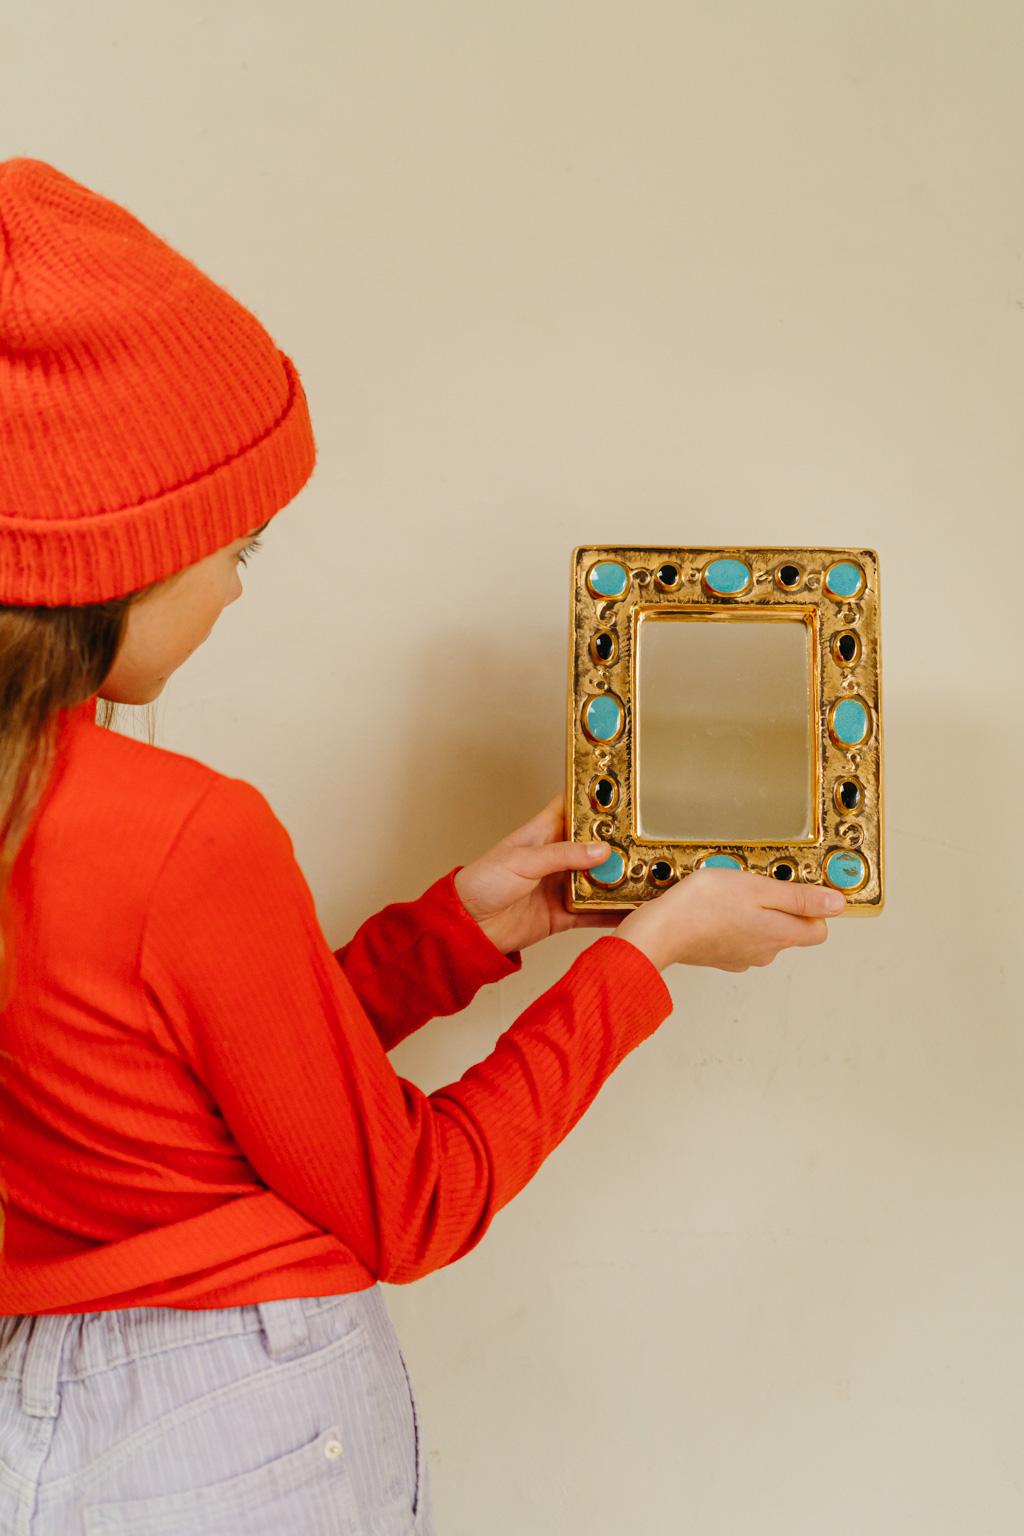 Ceramic François Lembo mirror, ceramic, gold and black, turquoise, jeweled,  signed.  For Sale